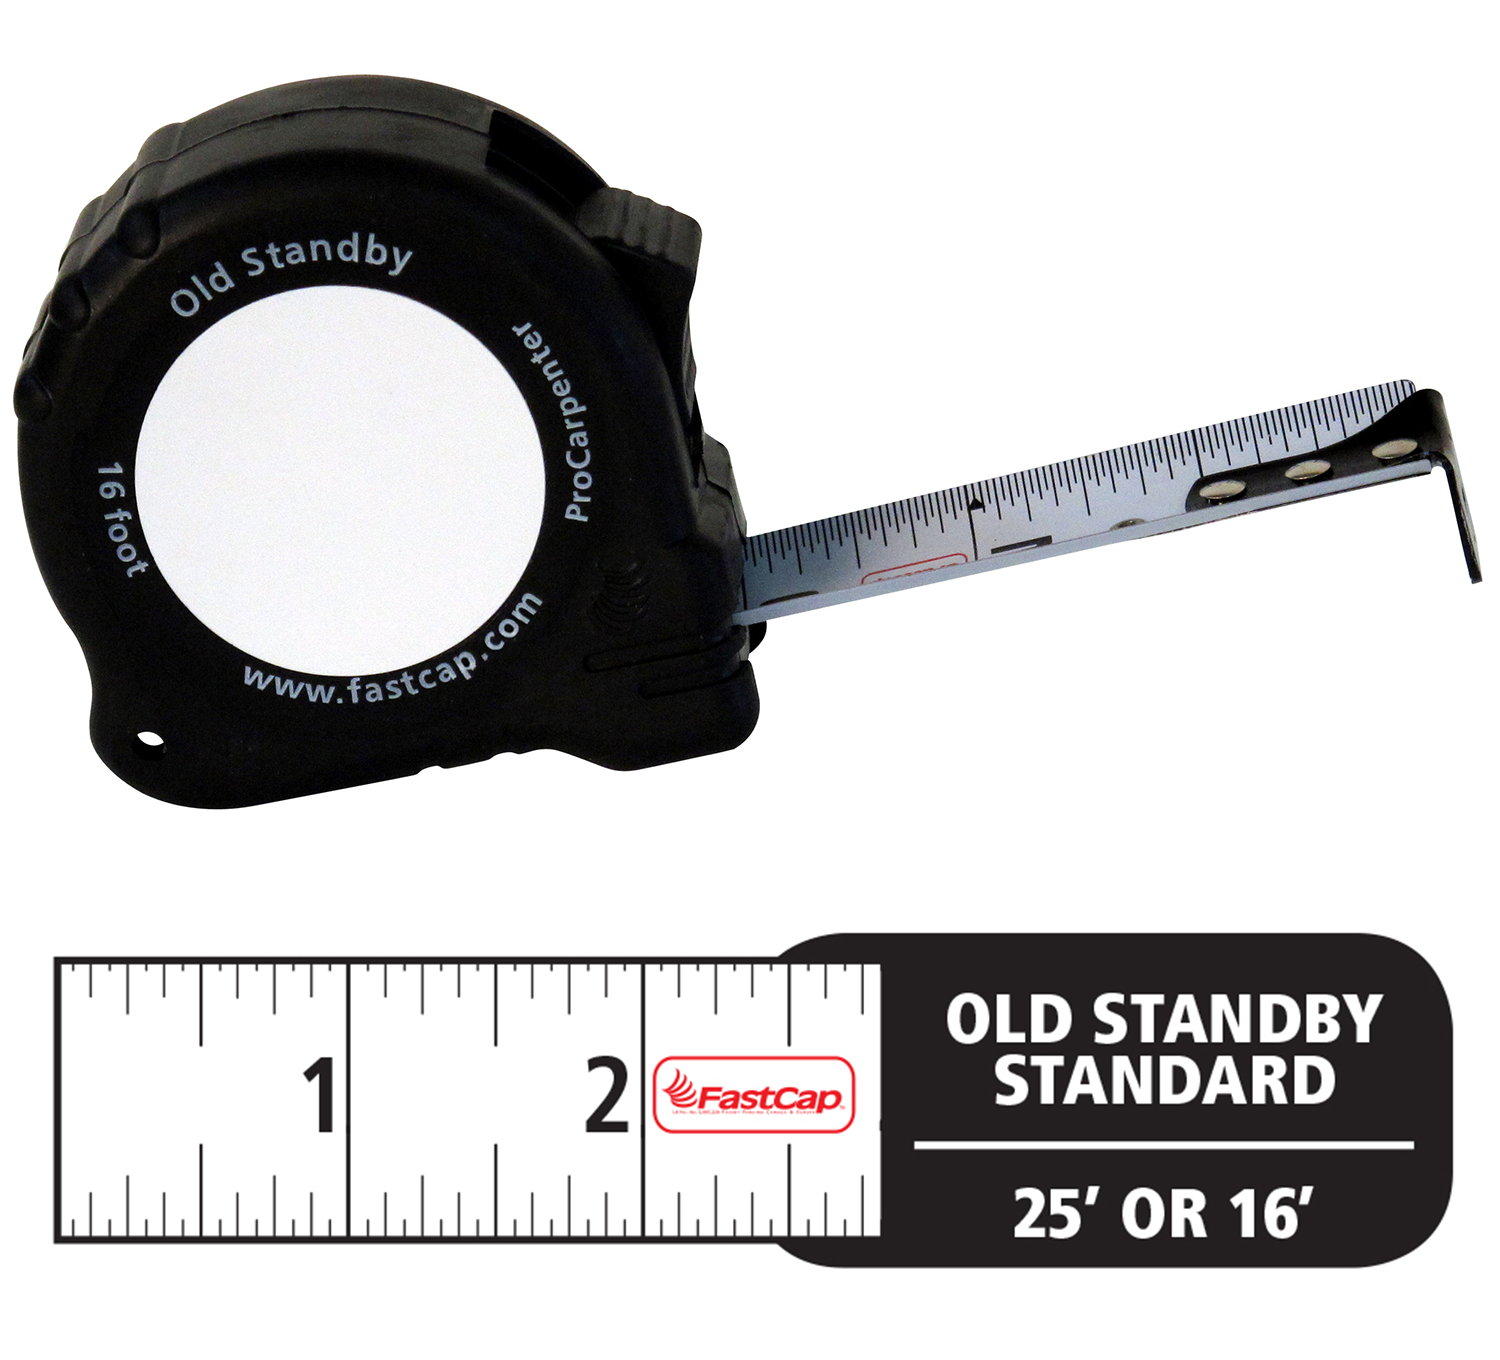 Official Wood Werks Supply, Inc FASTCAP MEASURING TAPE 16' Old Standby -  This IS Woodworking